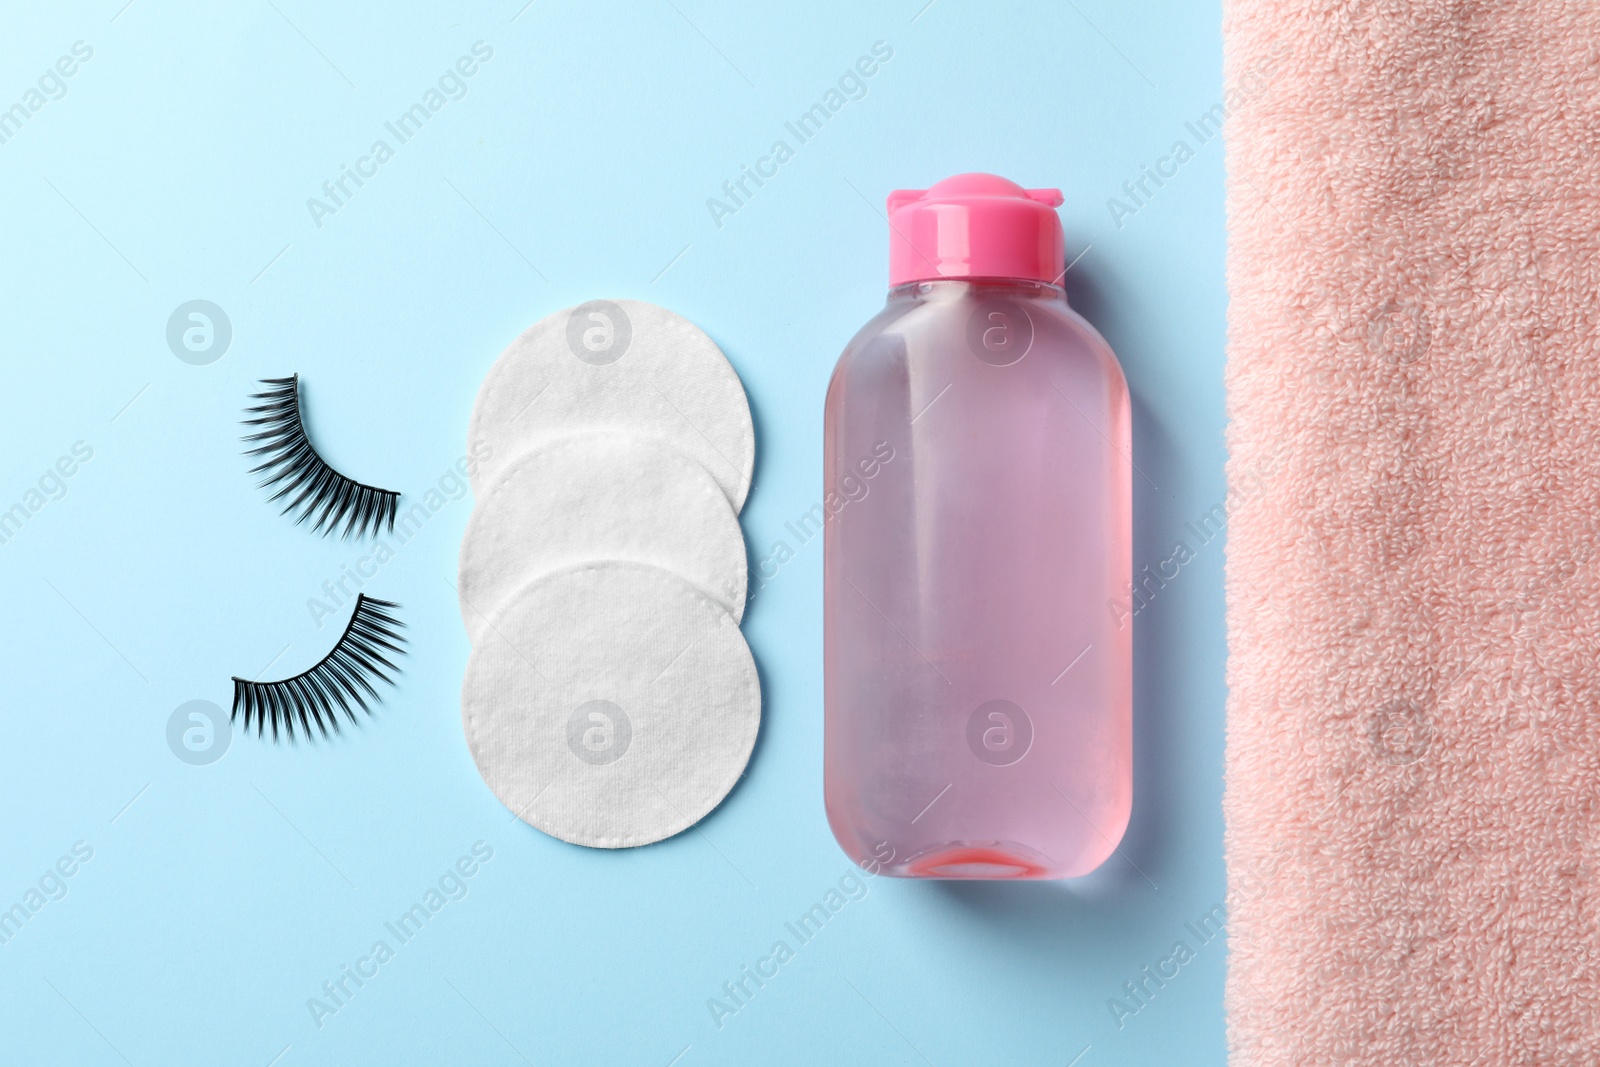 Photo of Flat lay composition with false eyelashes and makeup remover on light blue background